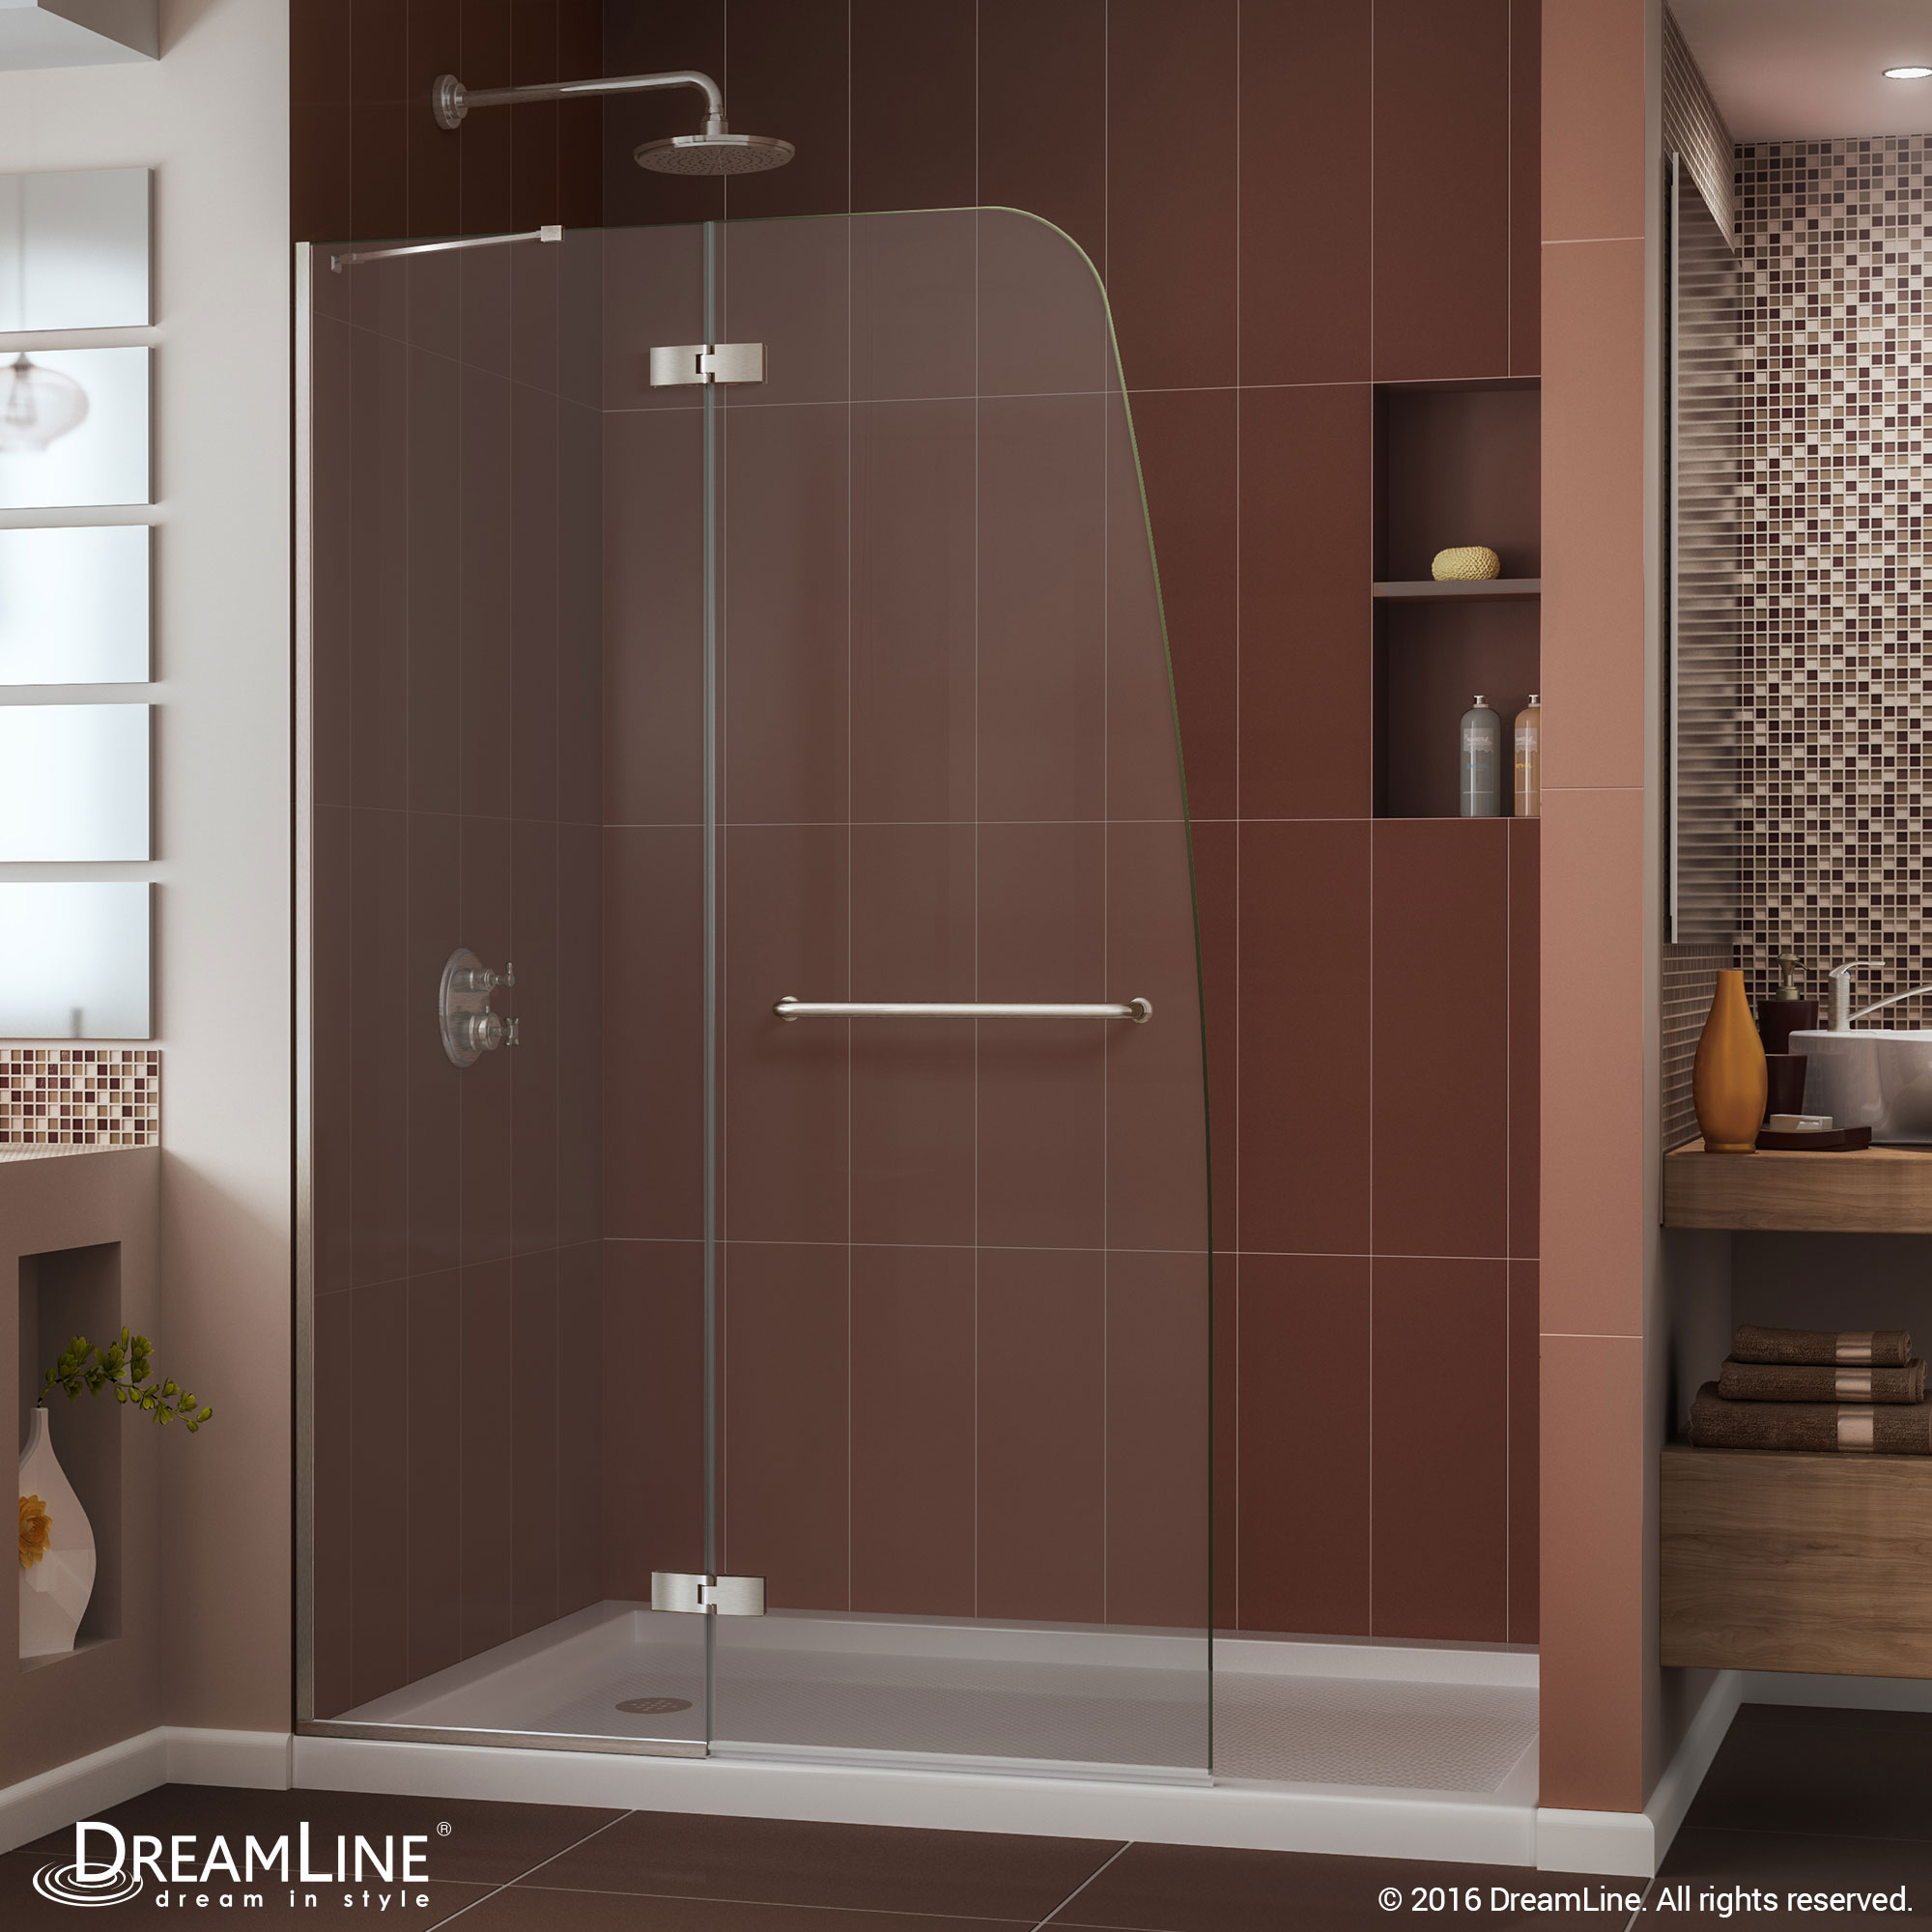 DreamLine Aqua Ultra 32 in. D x 60 in. W x 74 3/4 in. H Frameless Shower Door in Chrome and Left Drain Biscuit Base Kit